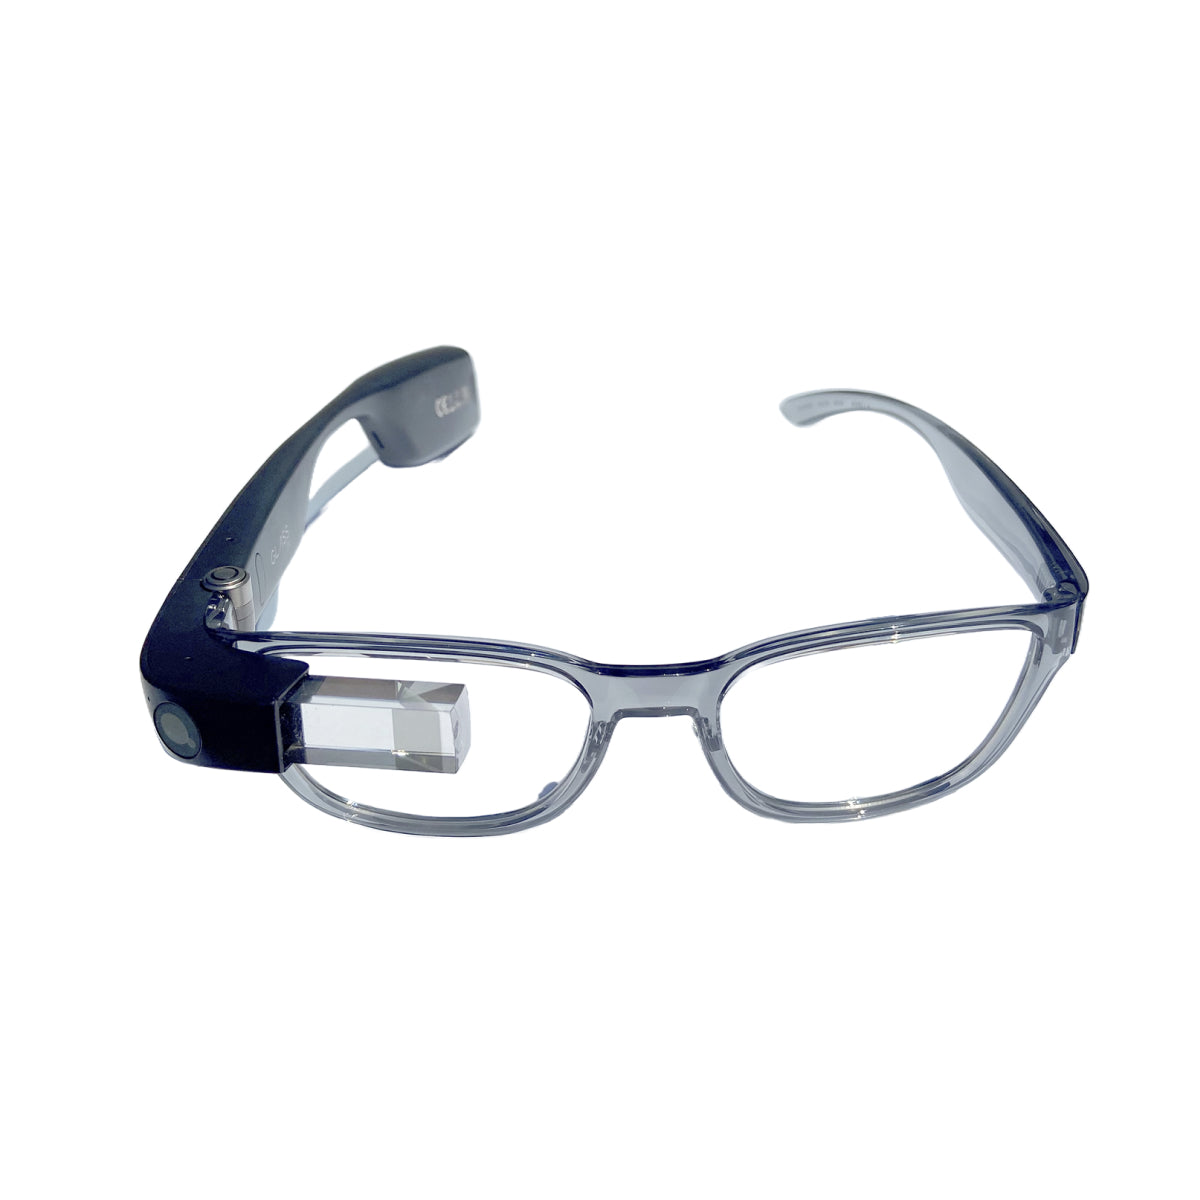 Transparent grey frames attached to the Envision Glasses - Front view